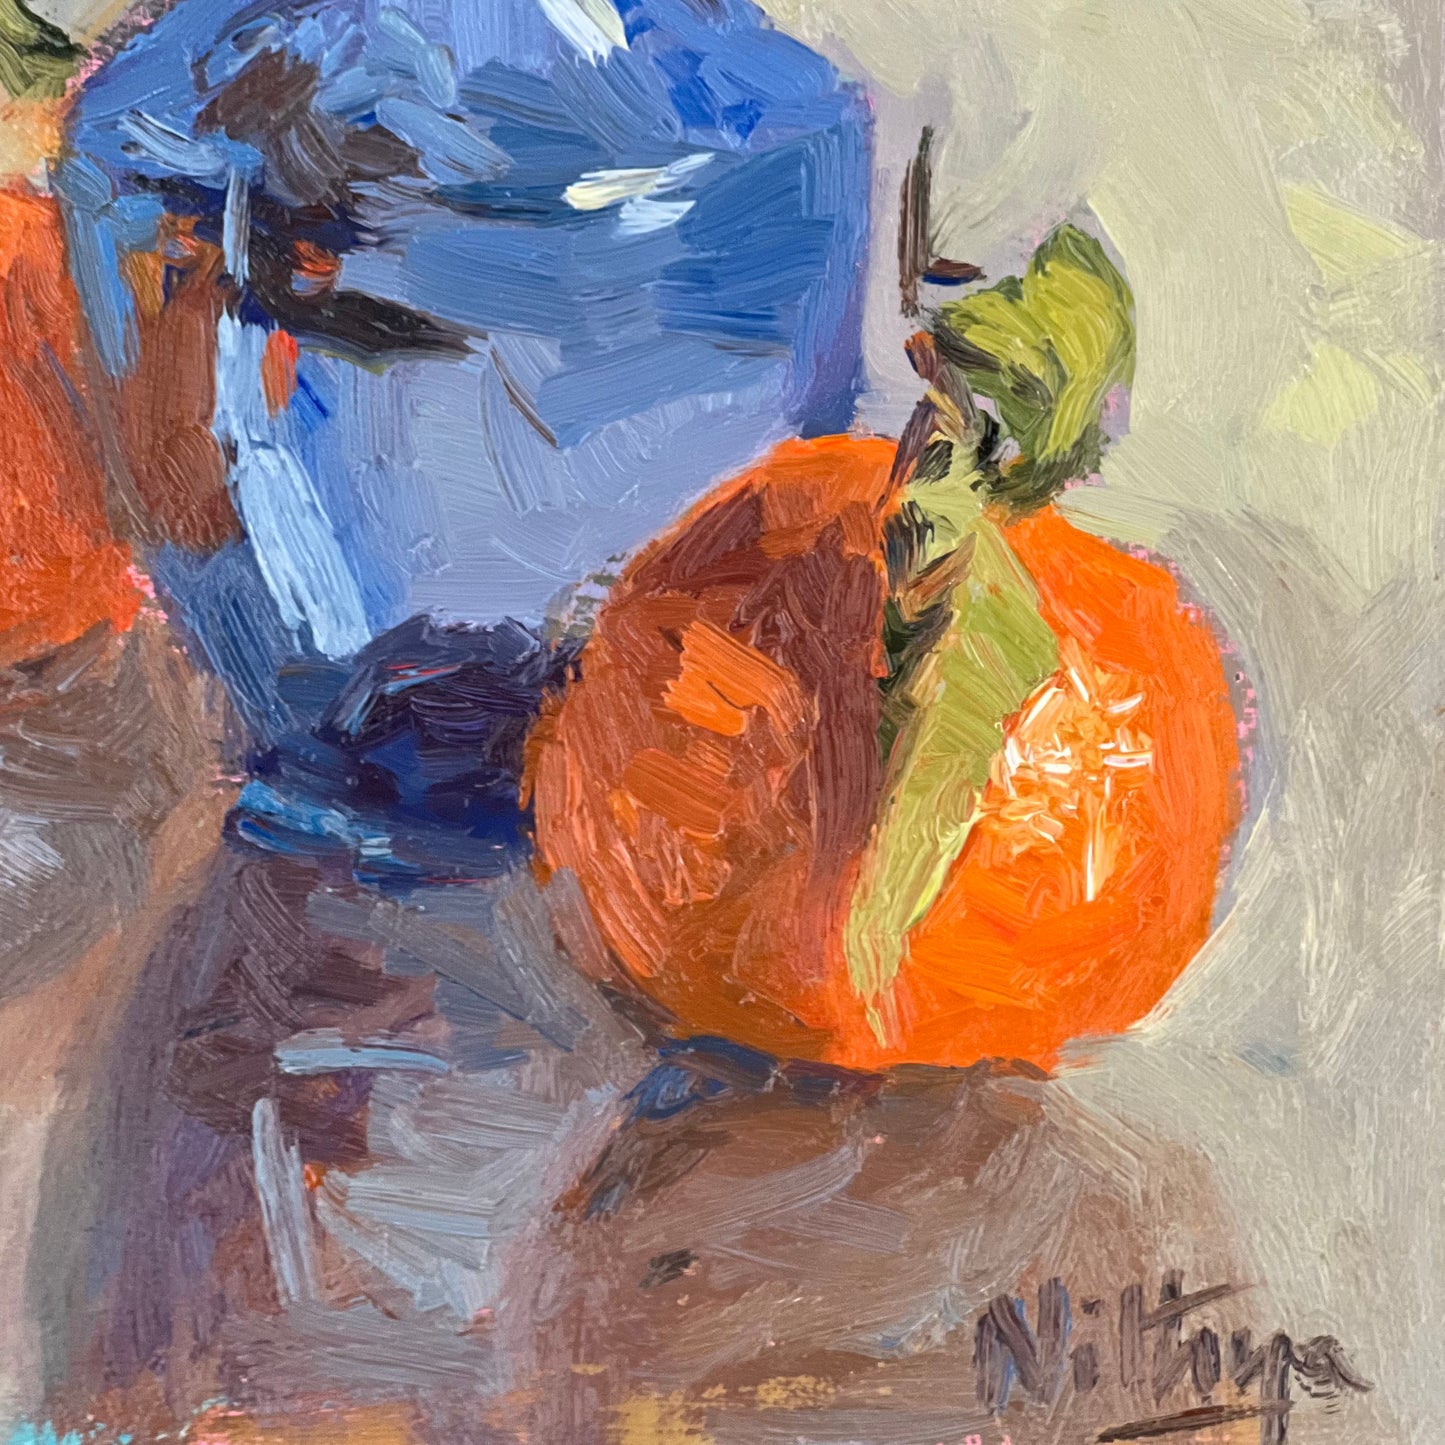 Mandarines with a blue glass! - Still Life Oil Painting